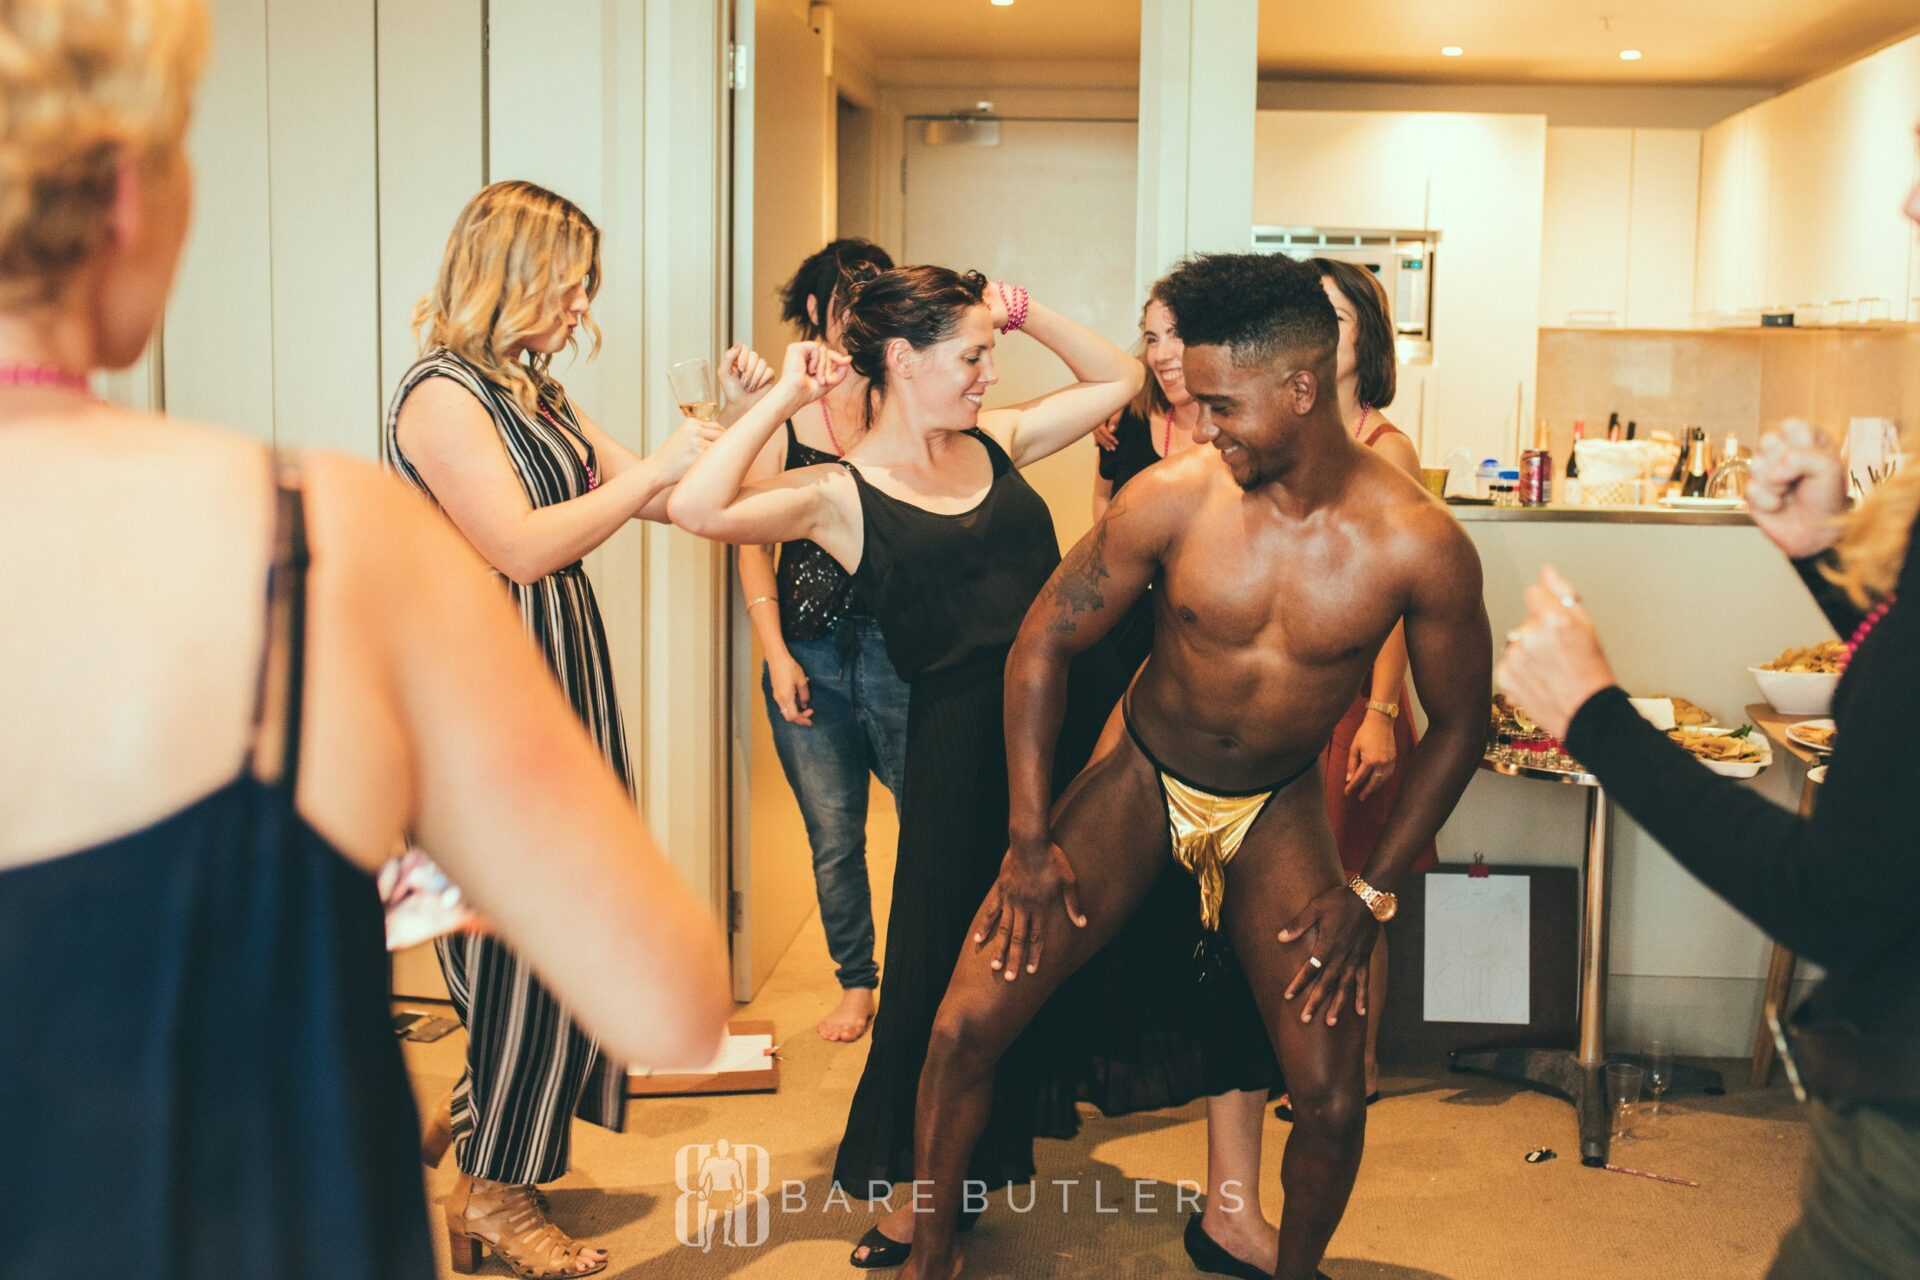 Wellington male stripper dances with Hen party guests, having lots of fun